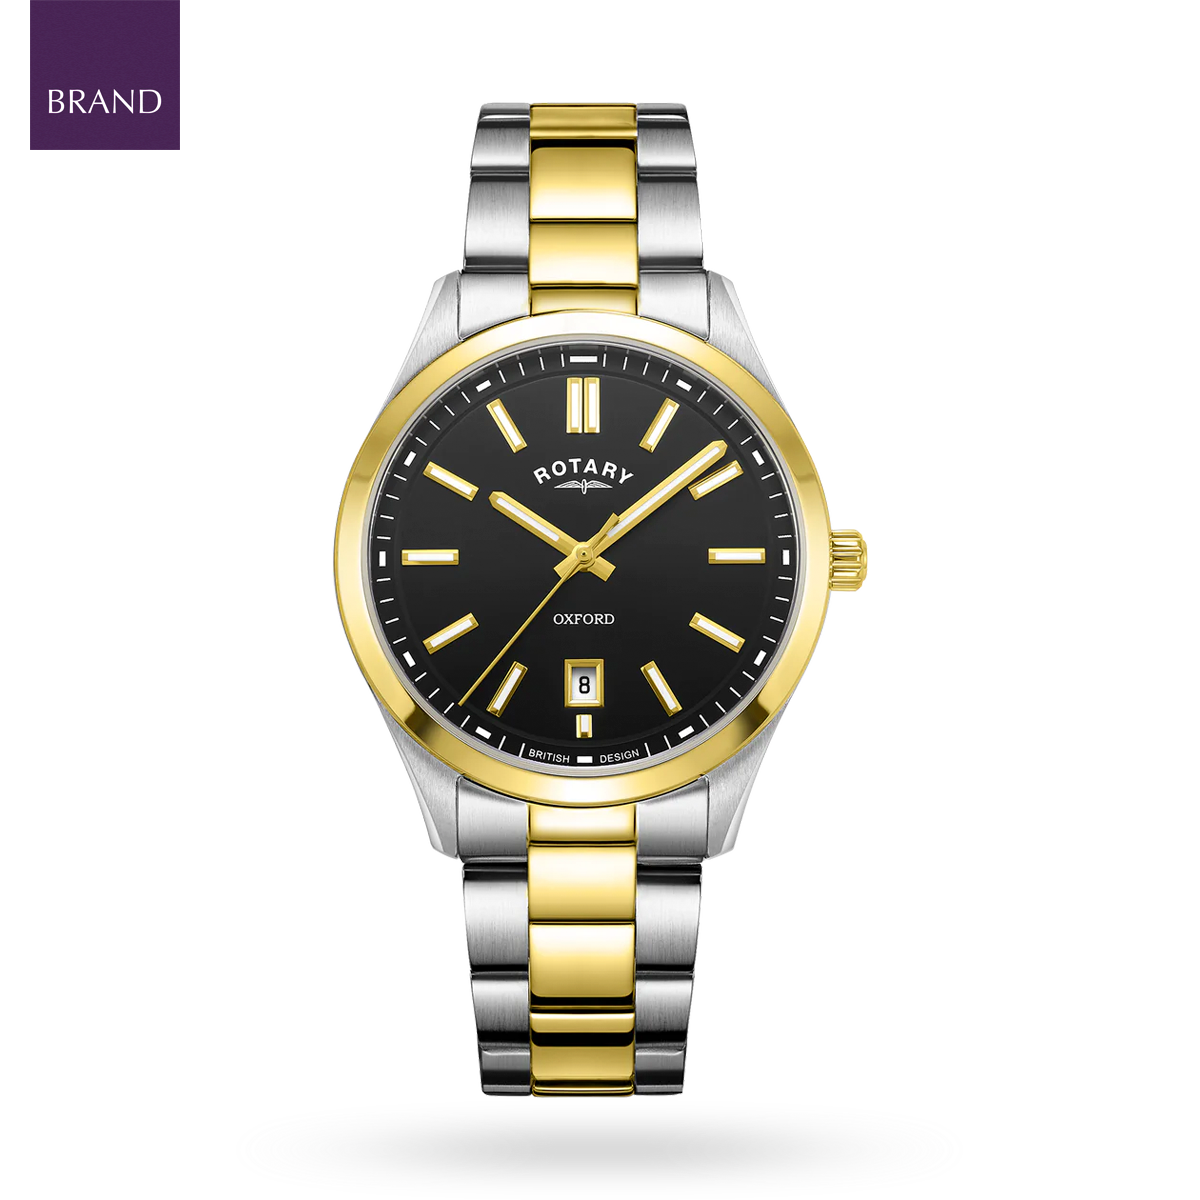 Rotary Oxford 2-Tone Watch, Black Dial with Stainless Steel Bracelet - GB05521/04